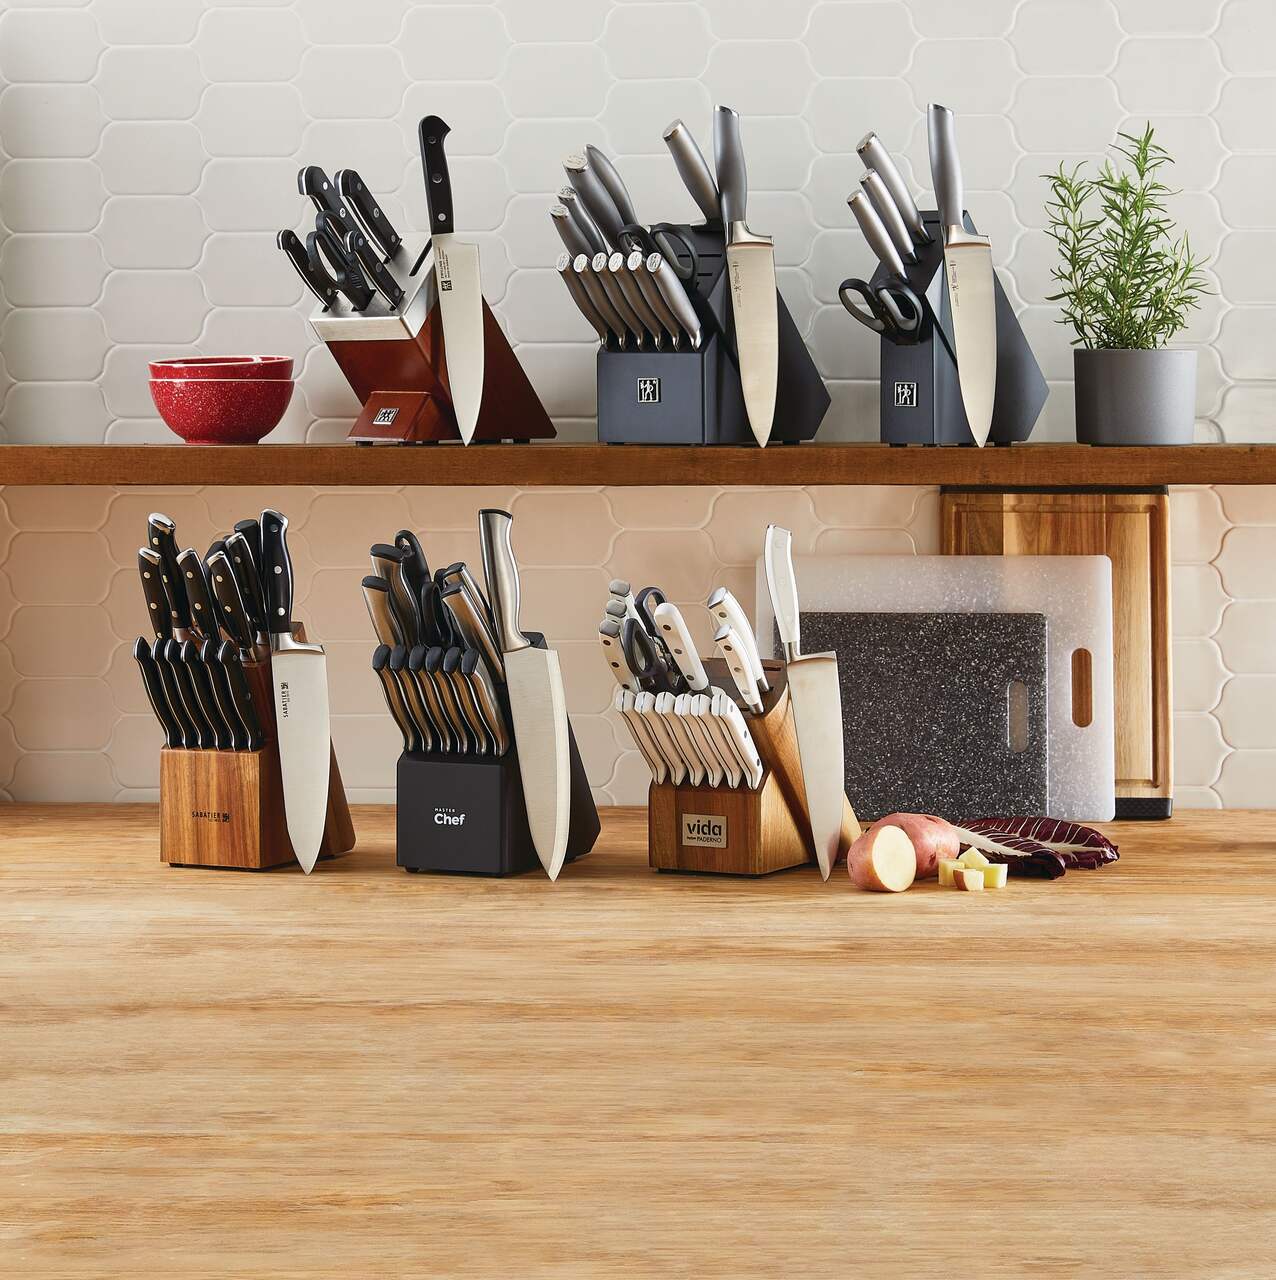 Sabatier 13-Piece Forged Triple Rivet Knife Block Set, High-Carbon  Stainless Steel Kitchen Knives, Razor-Sharp Knife Set with Acacia Wood Block,  White Handles 